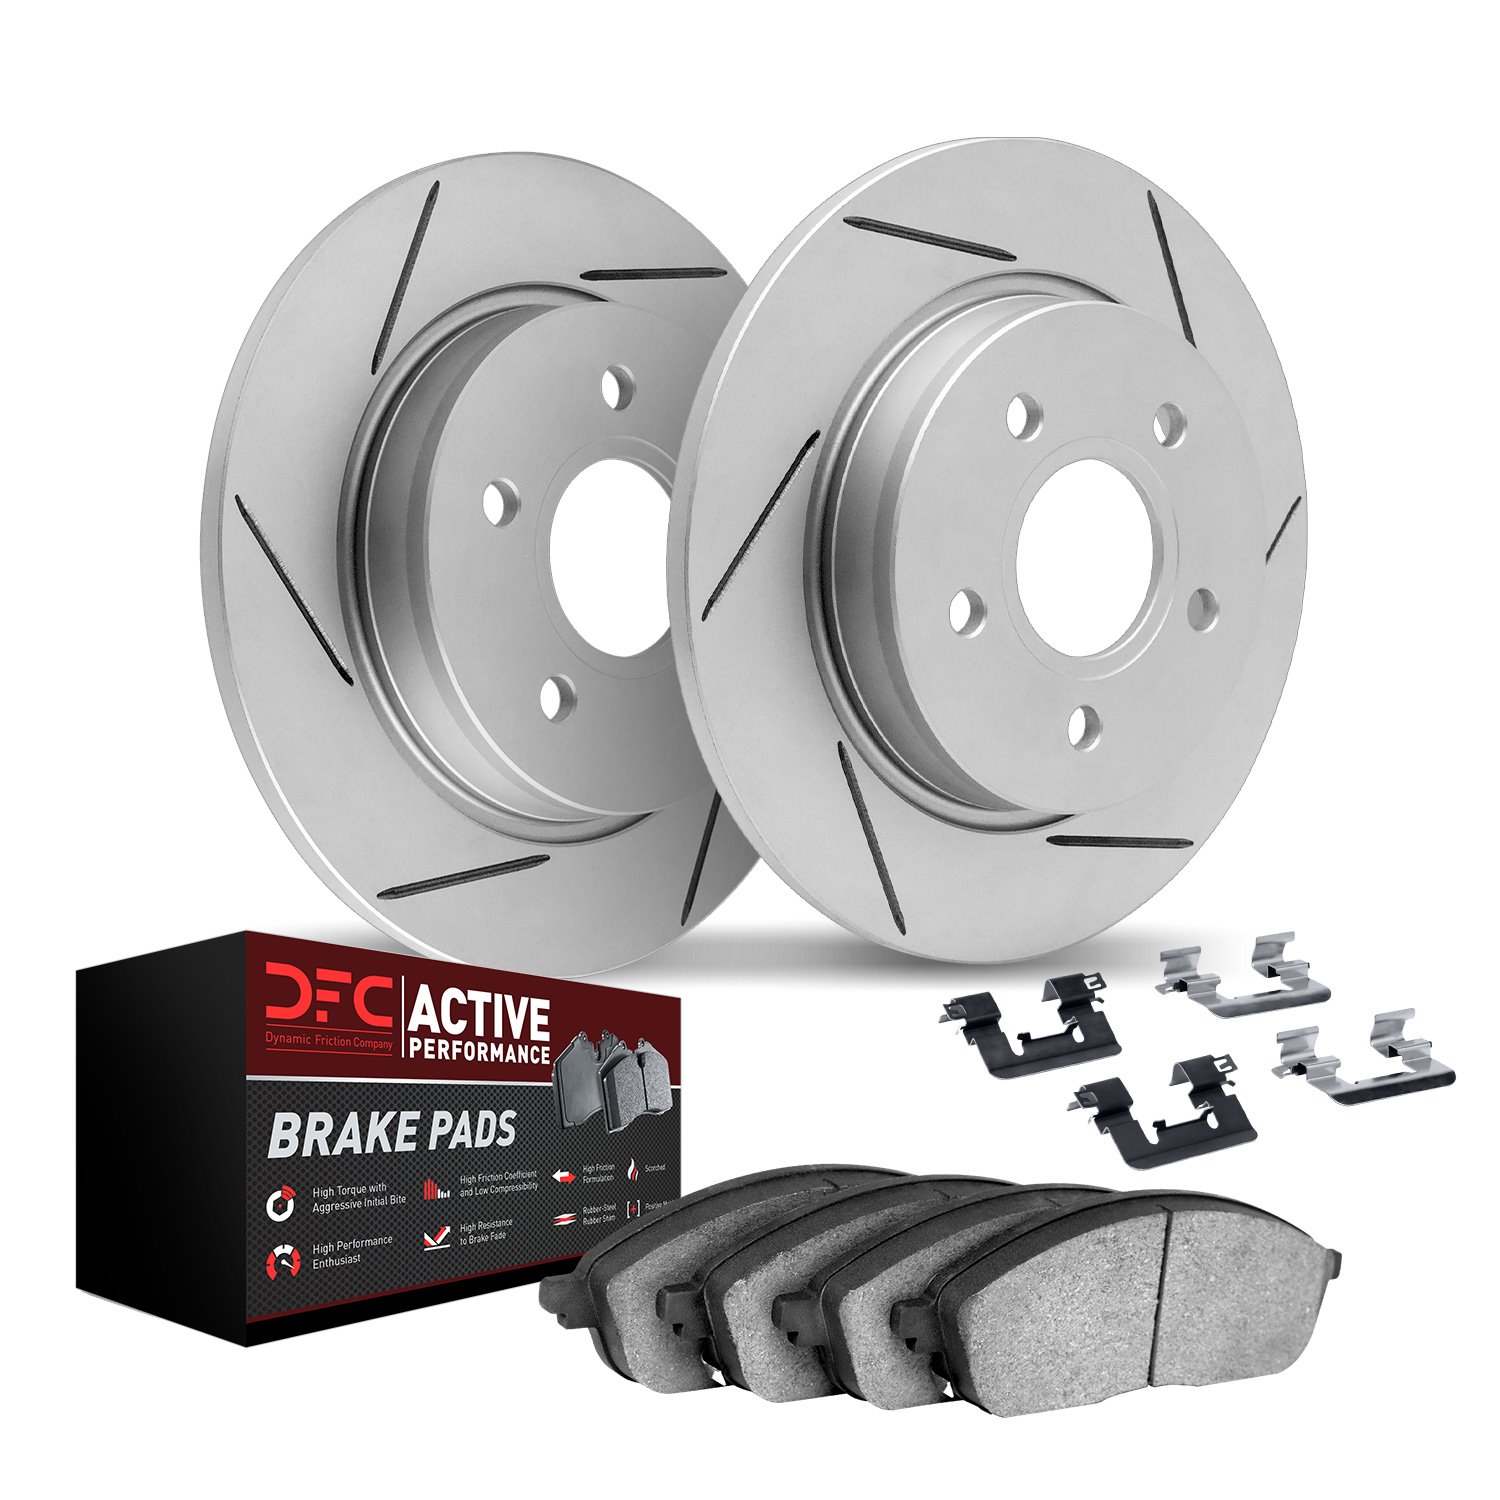 2712-59060 Geoperformance Slotted Brake Rotors with Active Performance Pads Kits & Hardware, 2003-2008 Acura/Honda, Position: Re